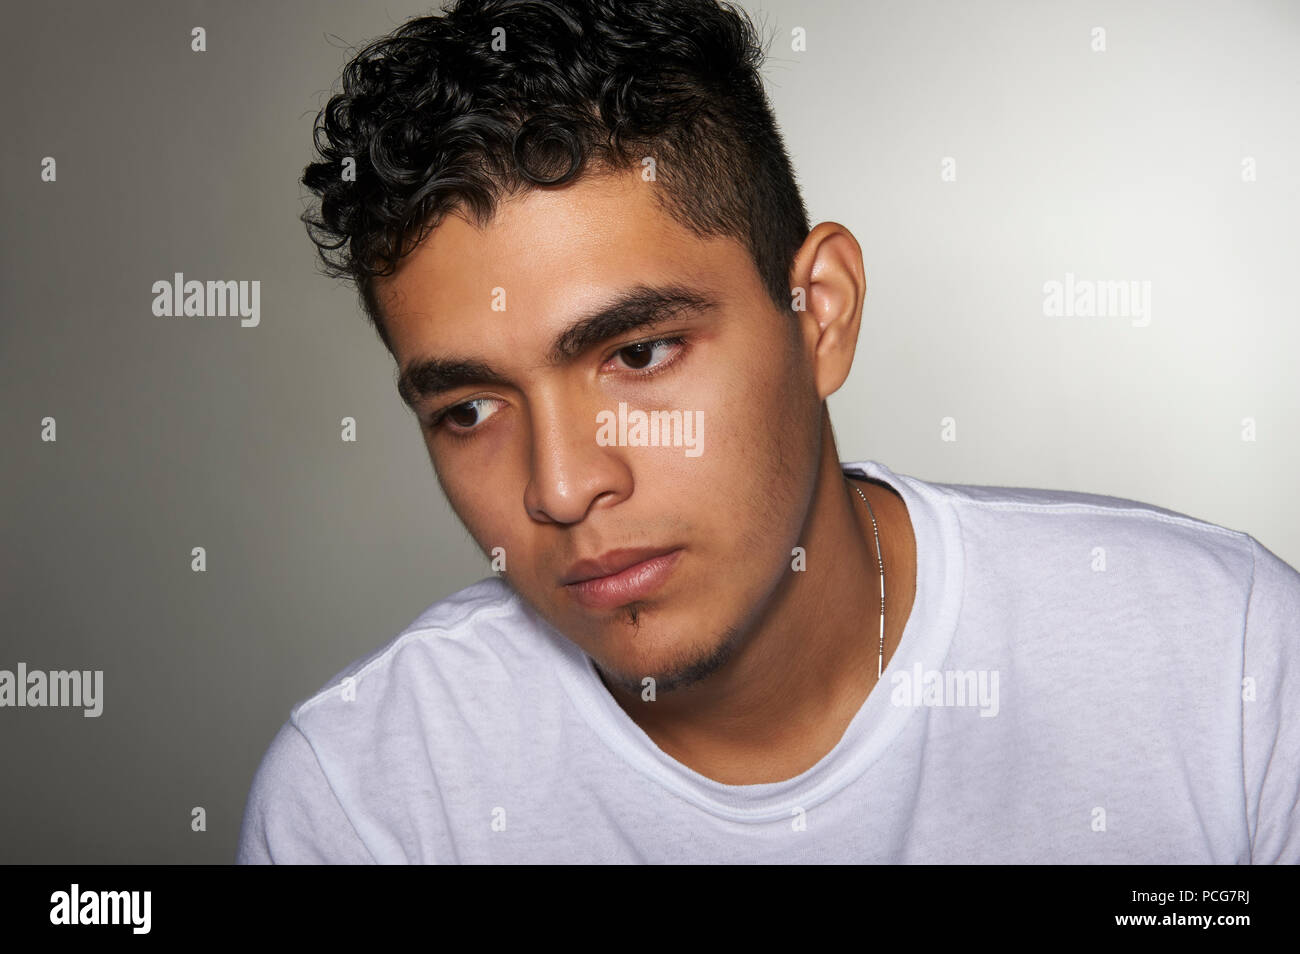 Studio portrait of a 19 years old young man, wearing a white t-shirt, looking down, to the side Stock Photo